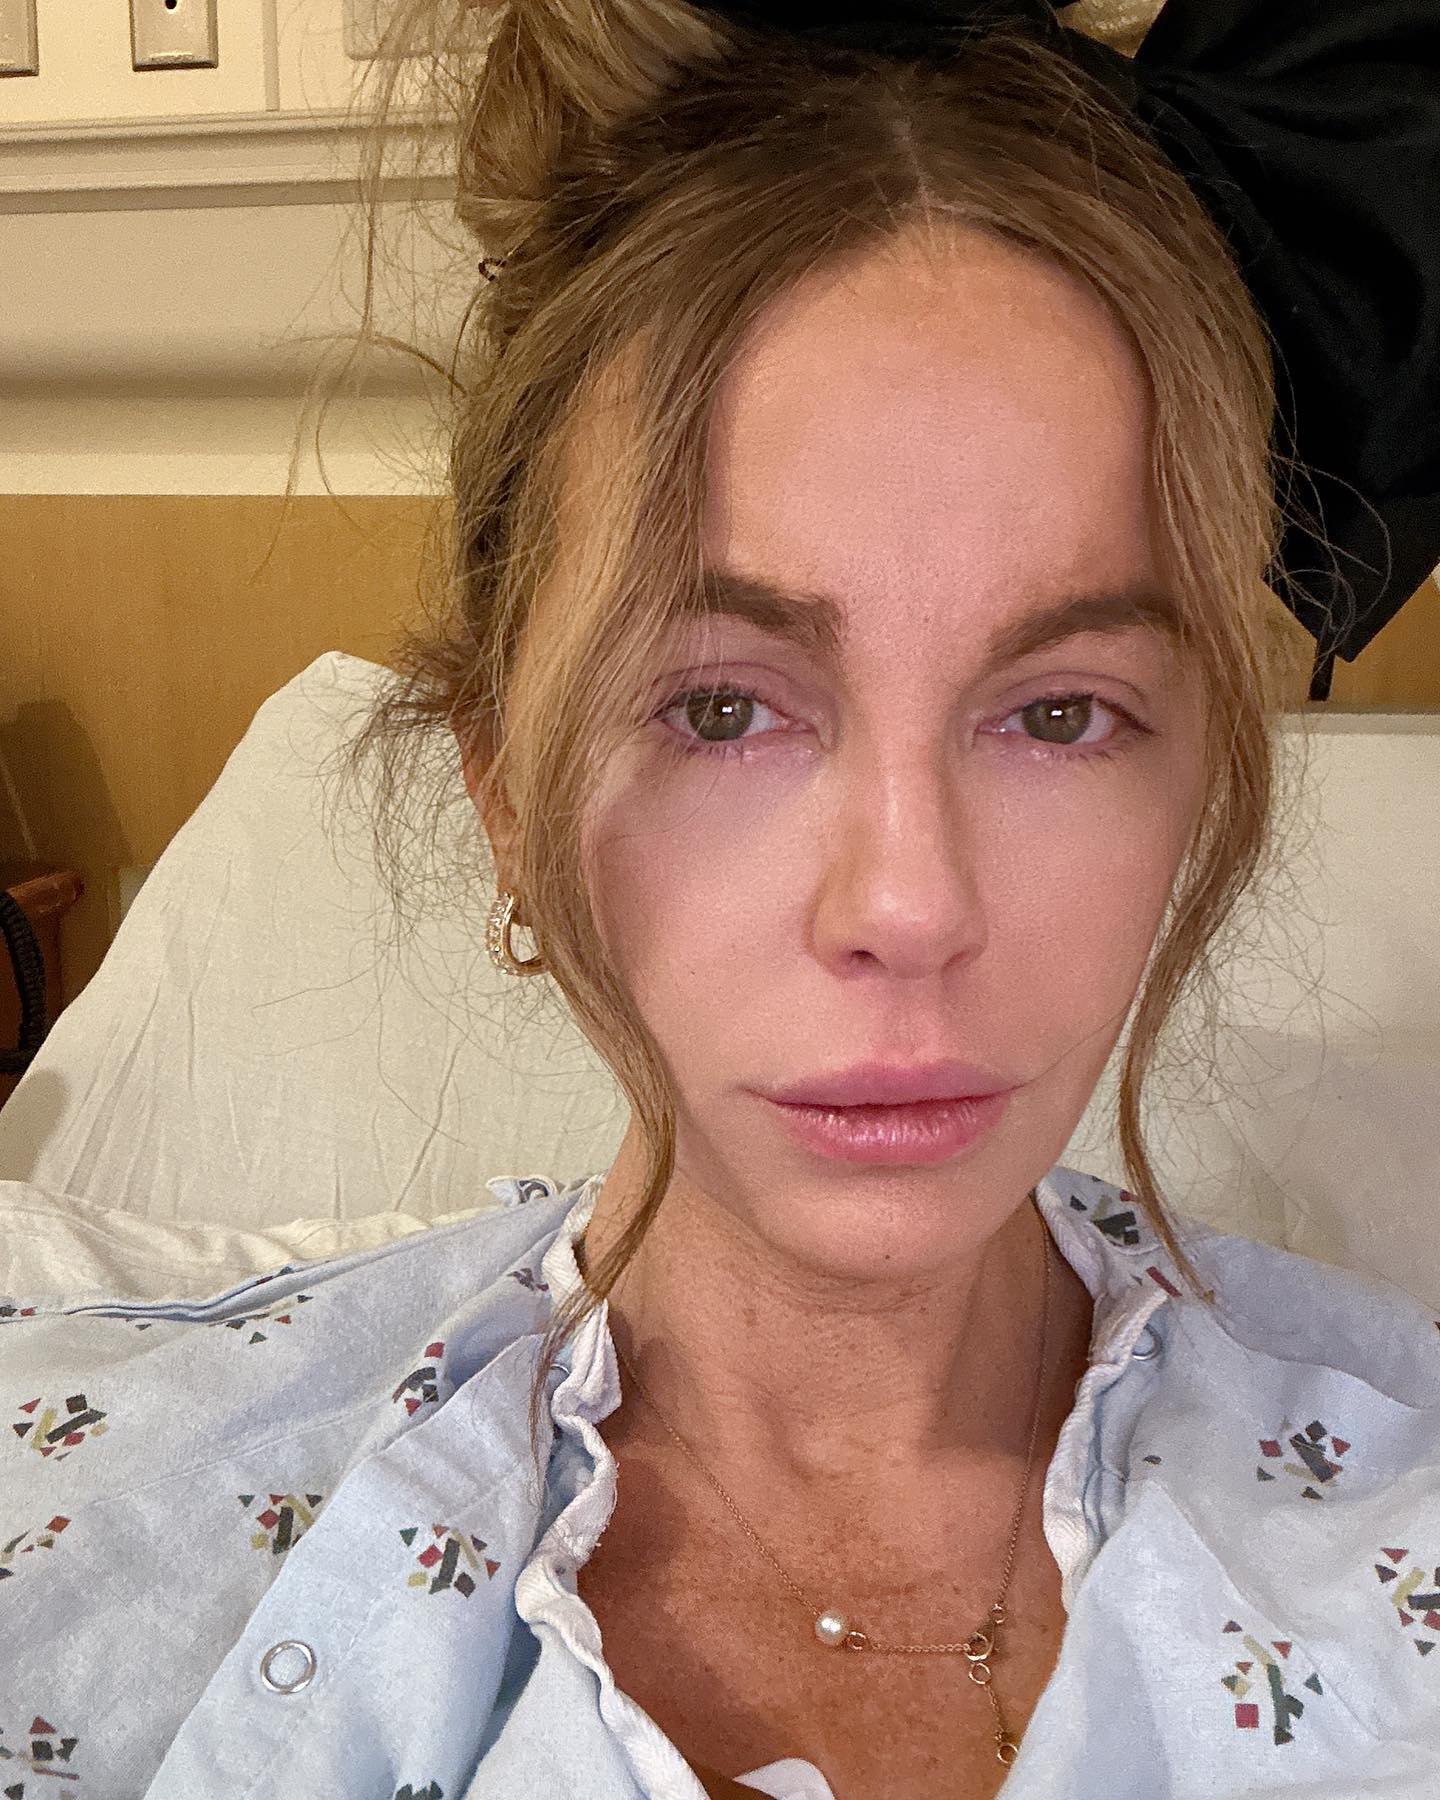 Kate Beckinsale shared a tearful picture of herself in a hospital bed